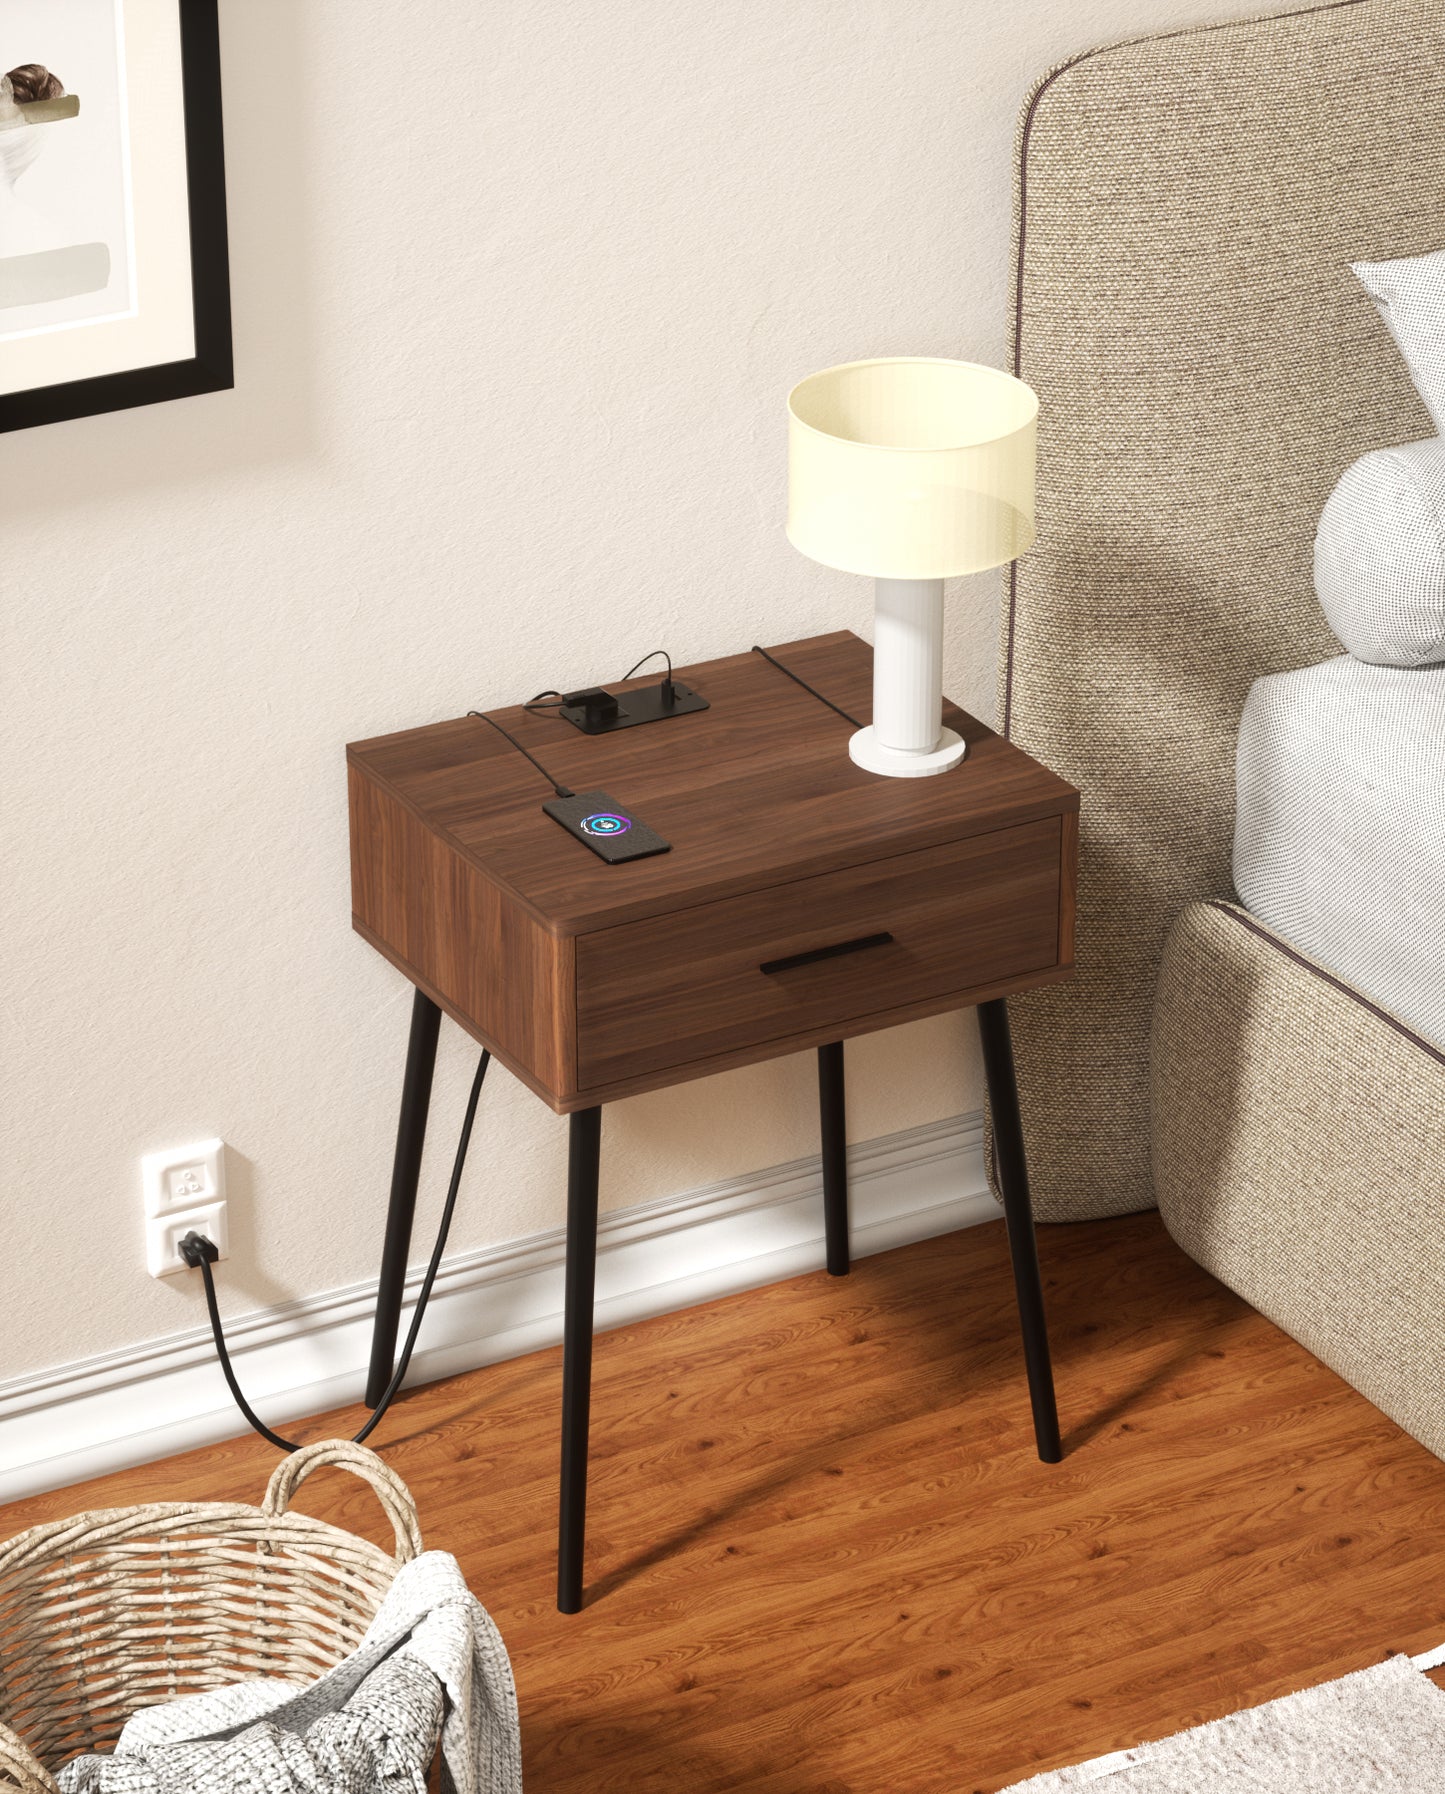 HAIOOU  End Table with Charging Station, Modern One Drawer Nightstand Side Table